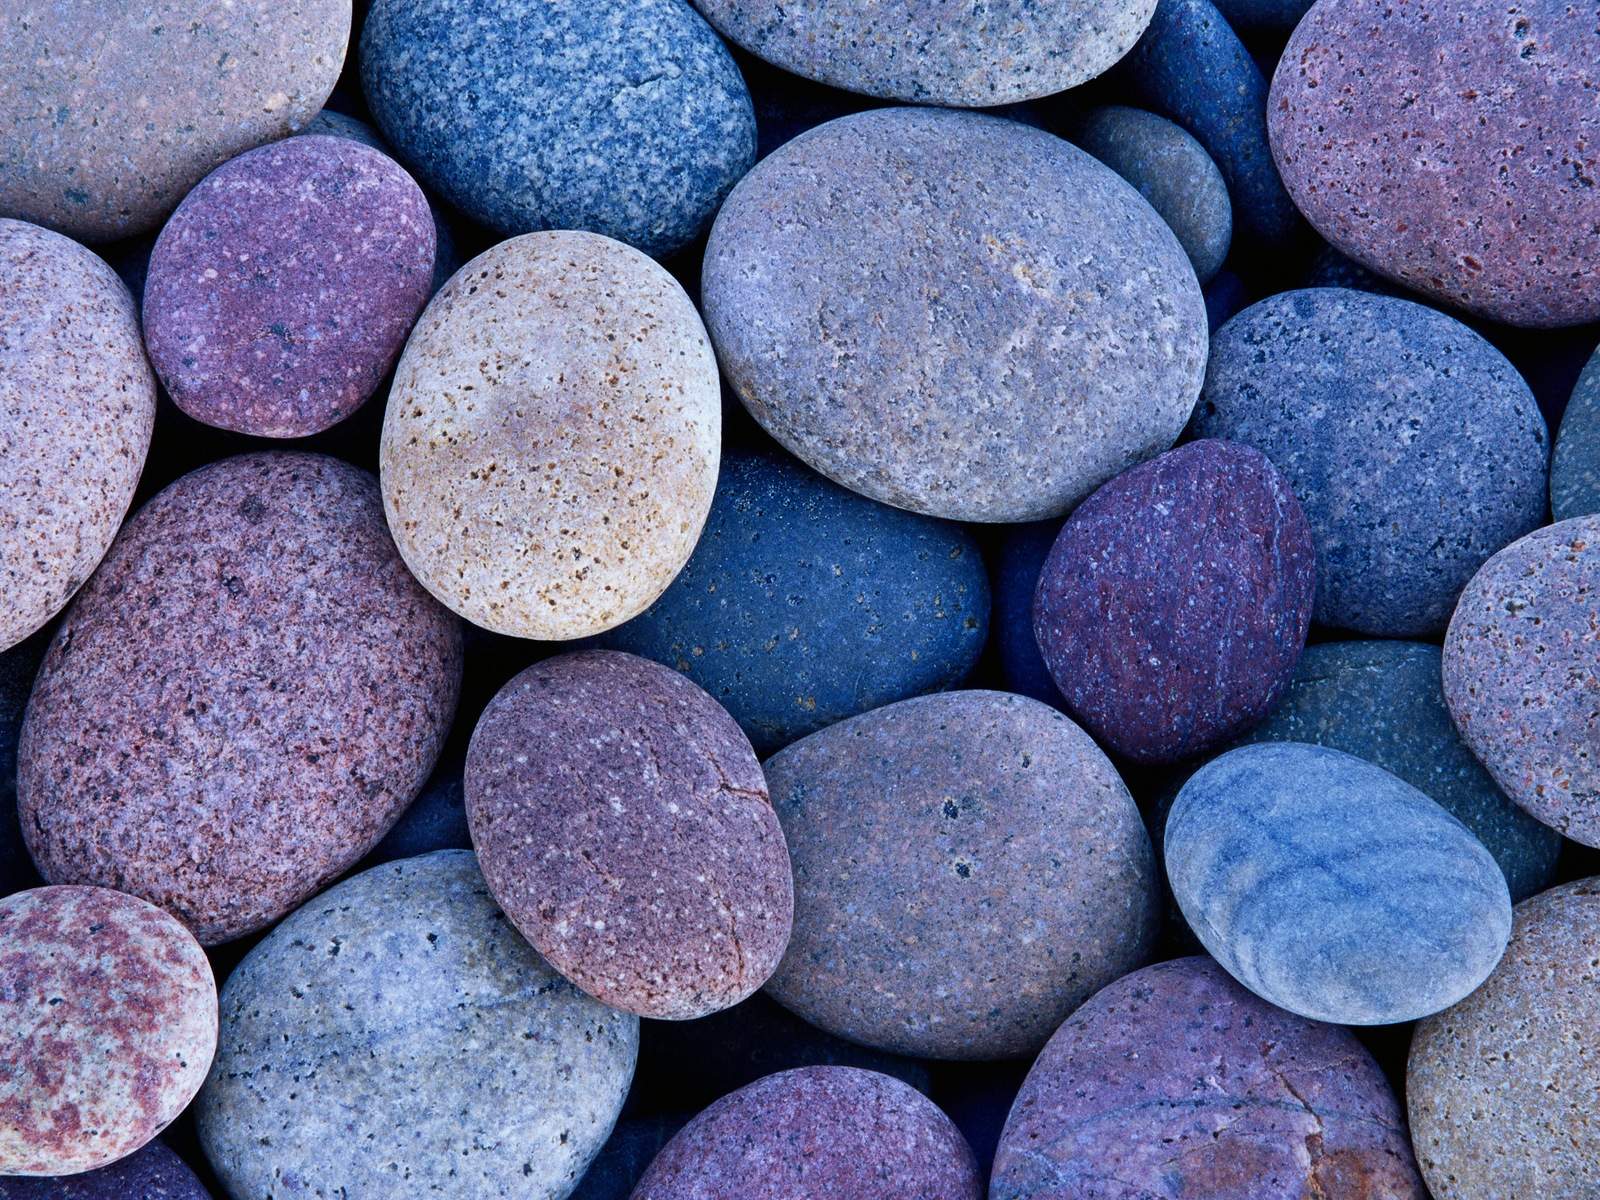 High Quality Stone Wallpaper Full HD Pictures